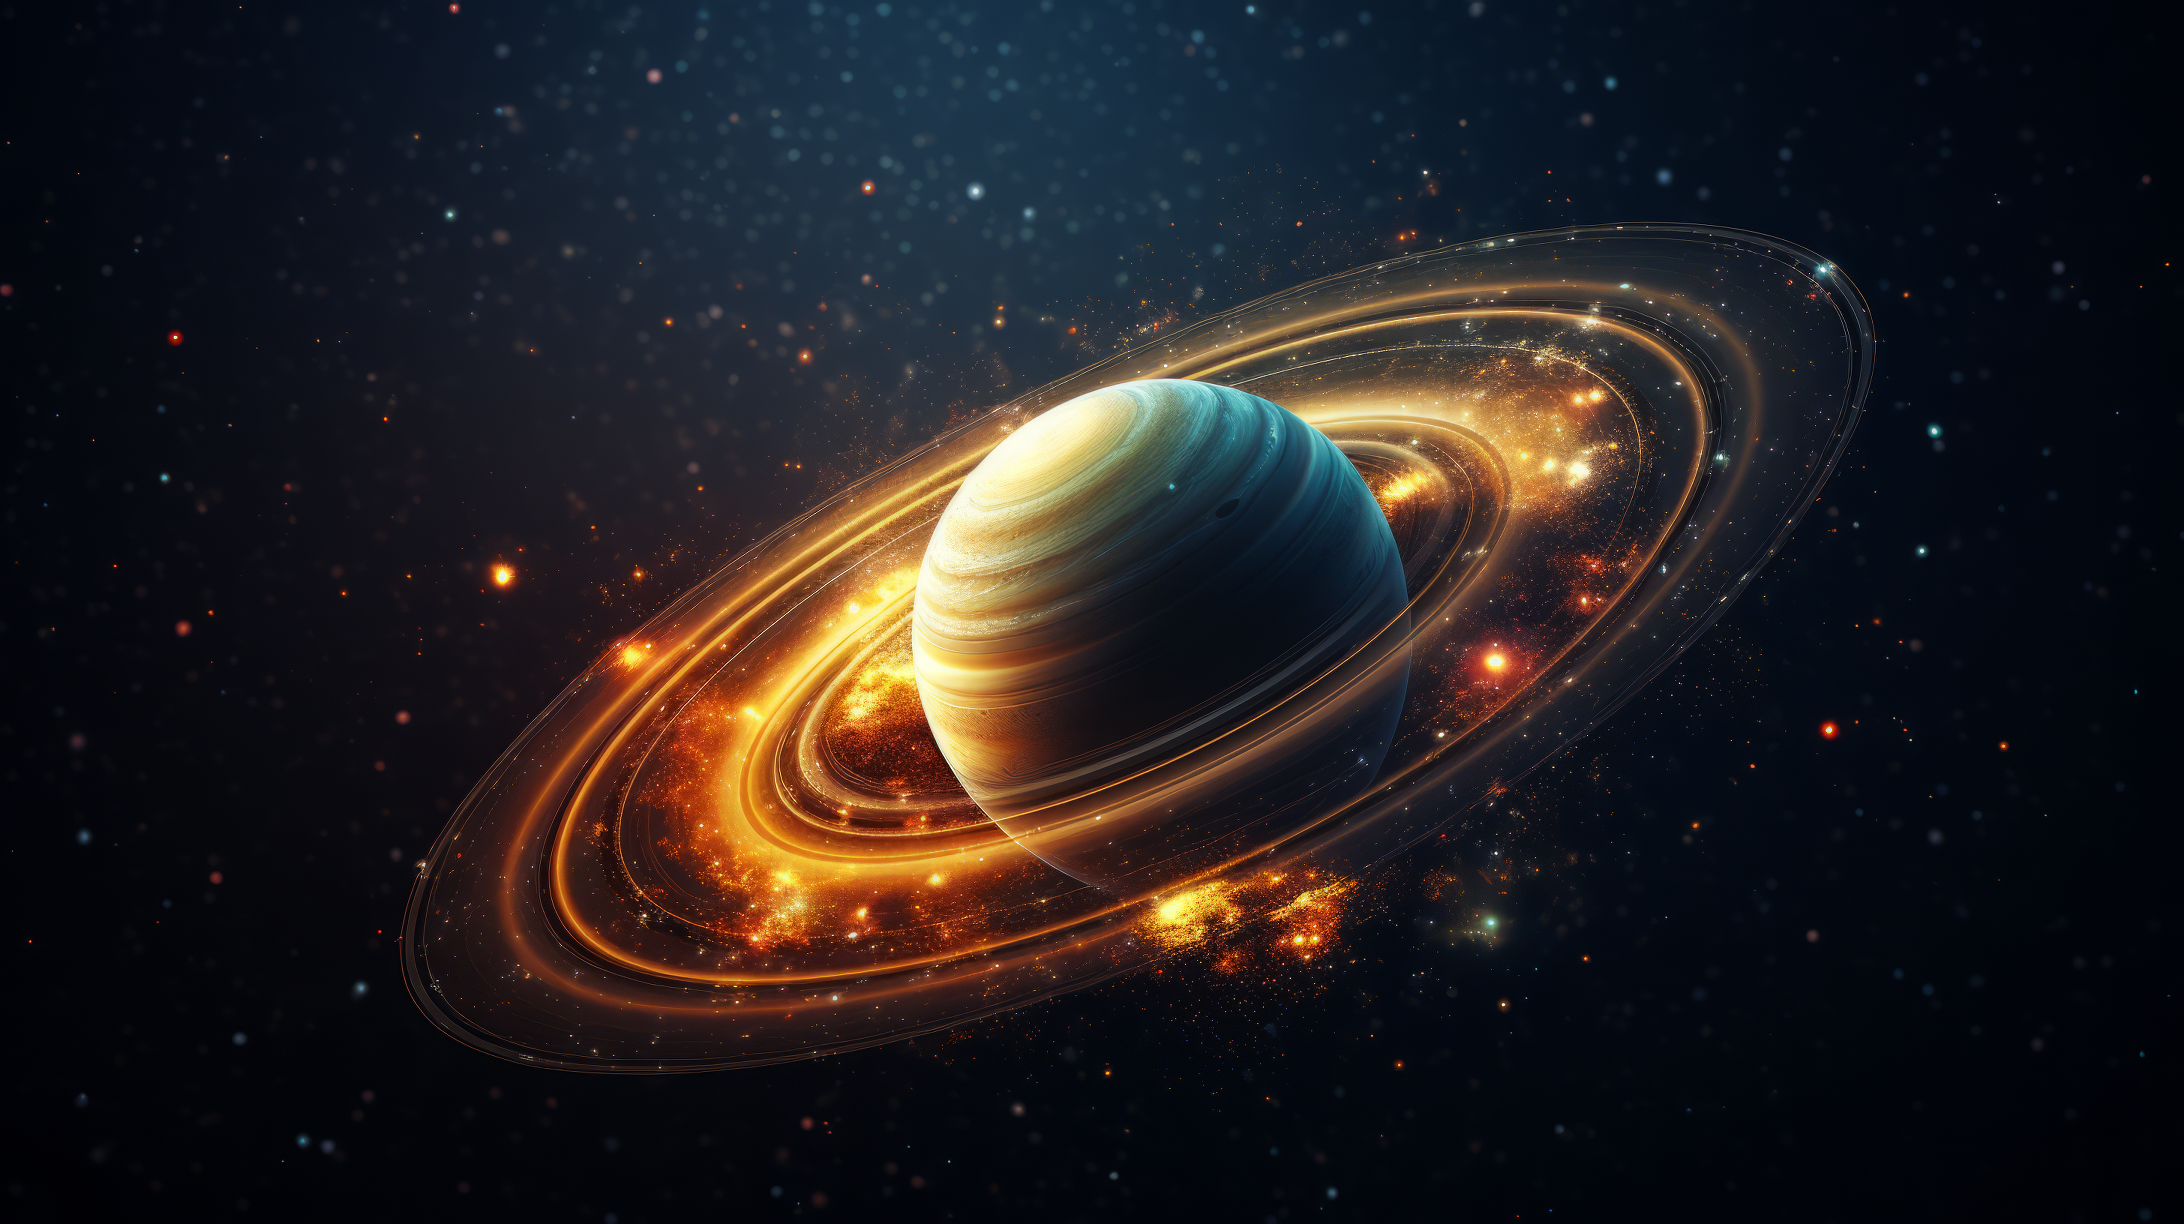 HD desktop wallpaper featuring the planet Saturn with prominent rings against a starry background.